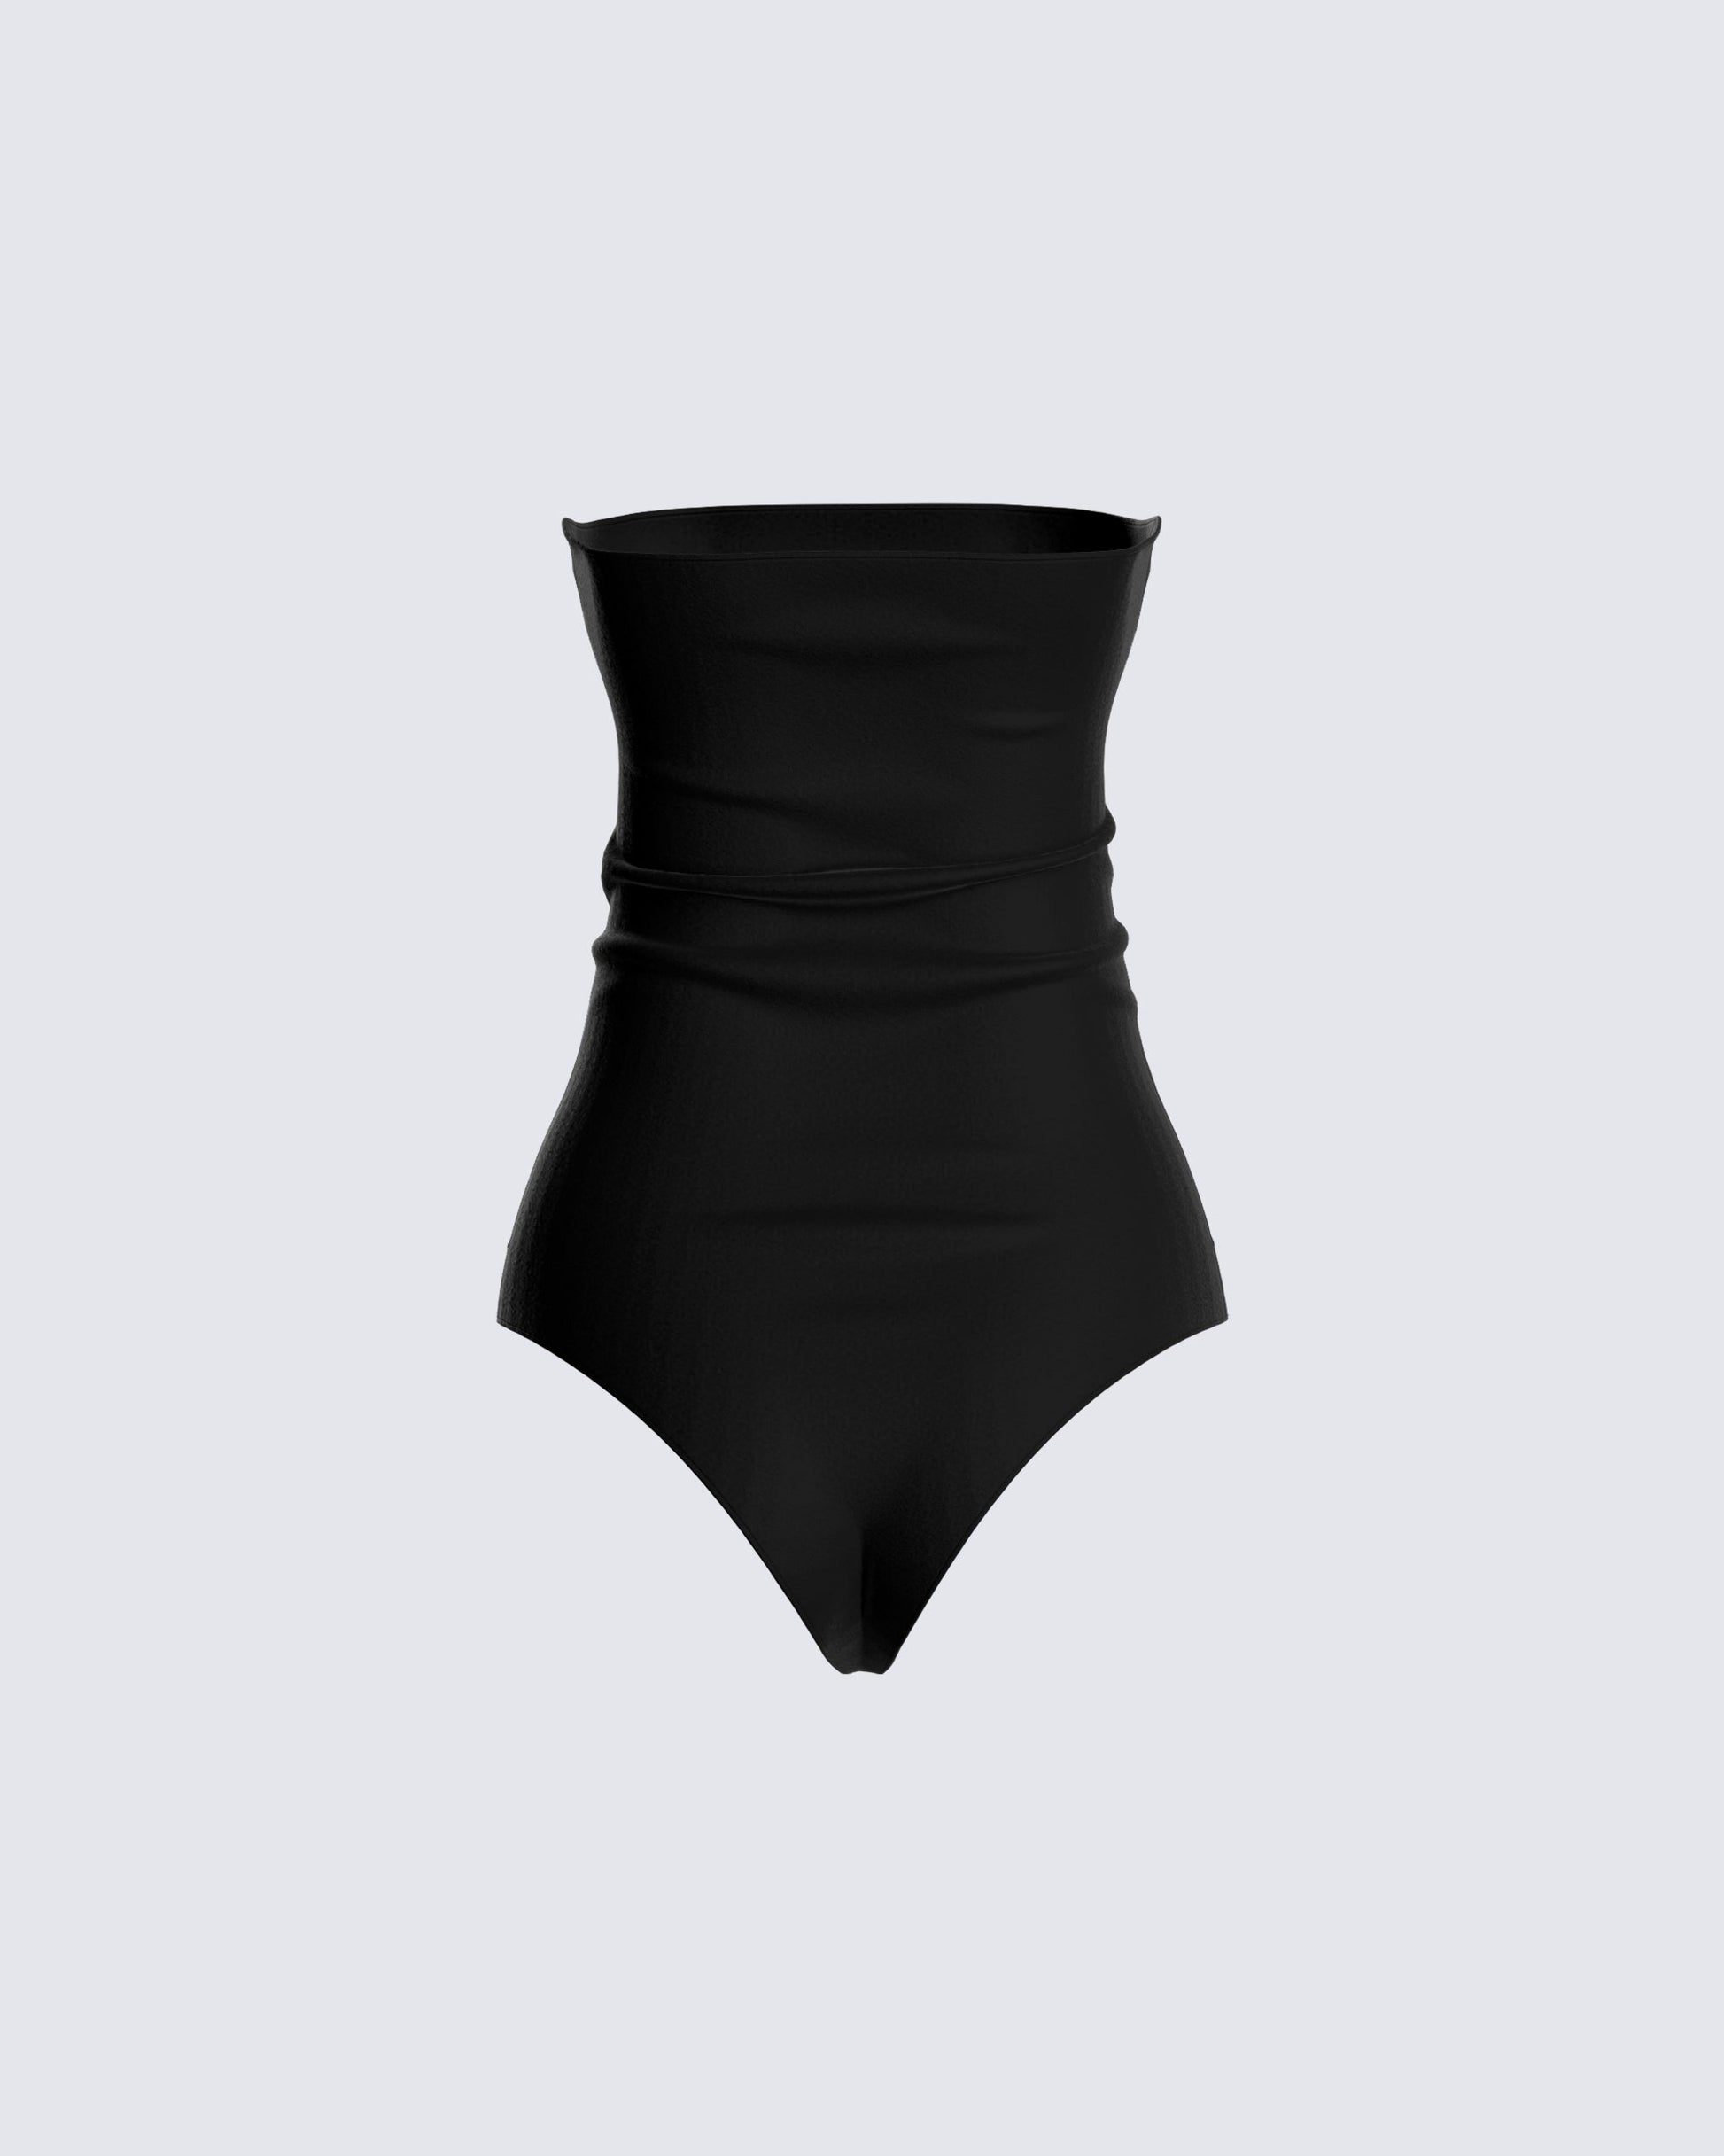  Music Legs Women's Strapless Bodysuit, Black, One Size:  Clothing, Shoes & Jewelry